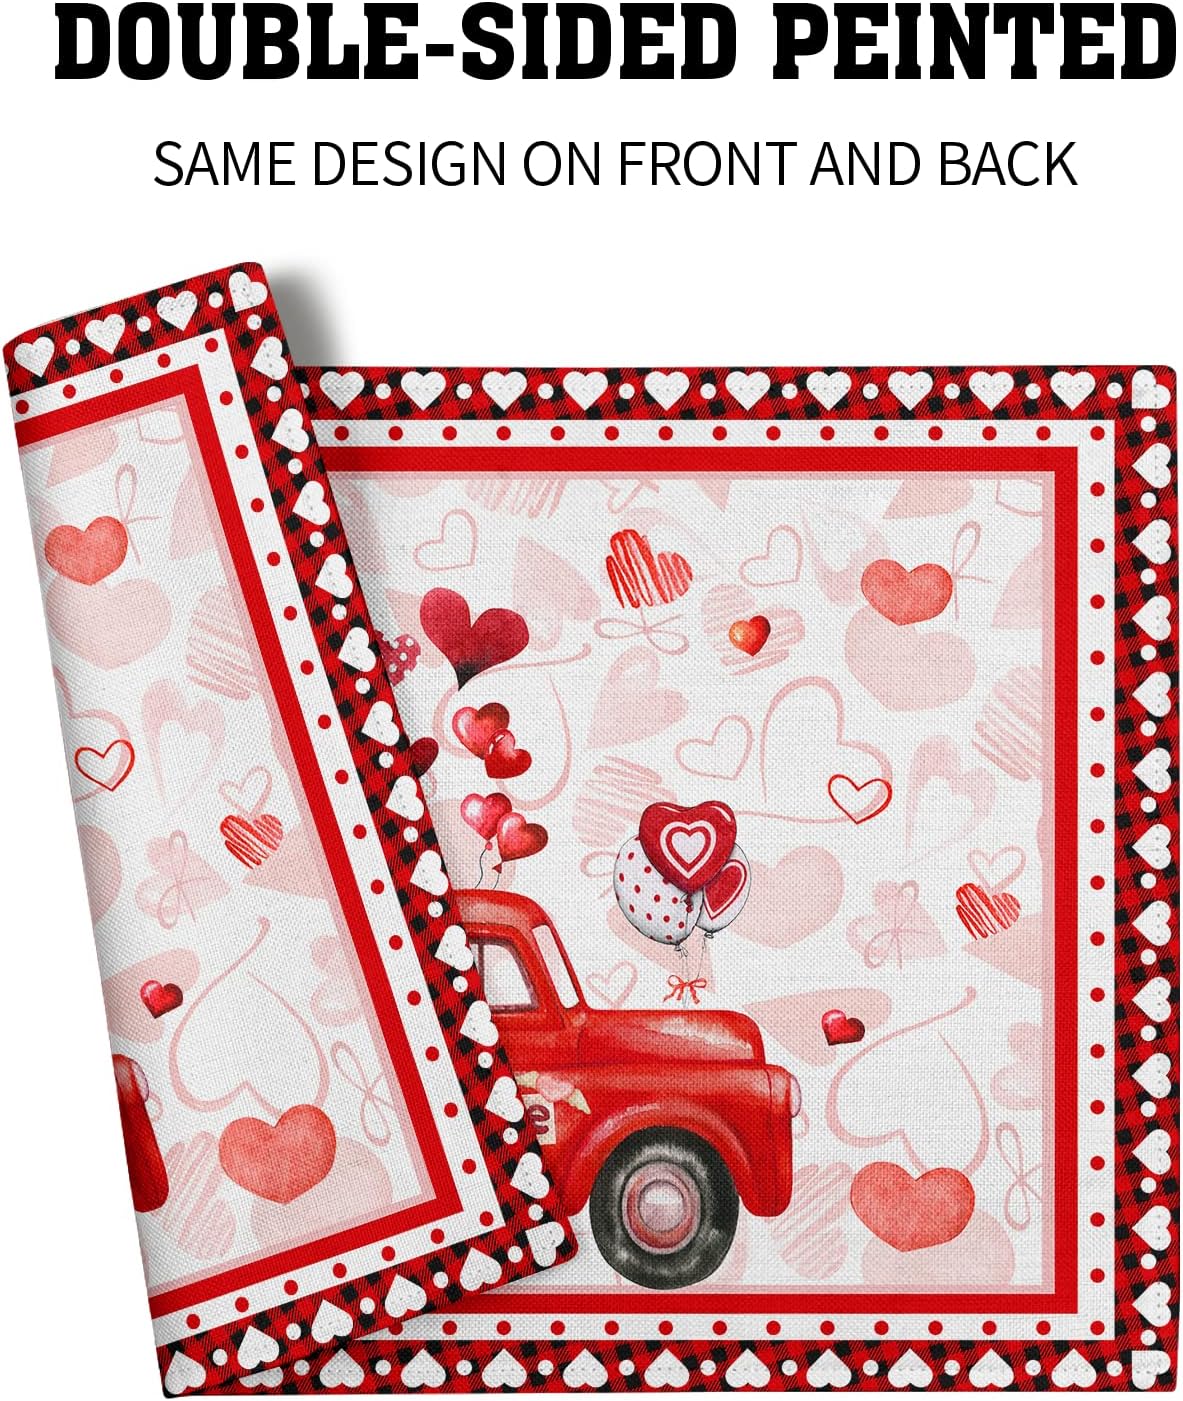 Kcozydecor Red Plaid Truck Love Heart Placemats Valentines Day Placemats Set of 4 Cute Gnome Place Mats for Kitchen Dining Party Table Home Decoration Size 18x12 inch